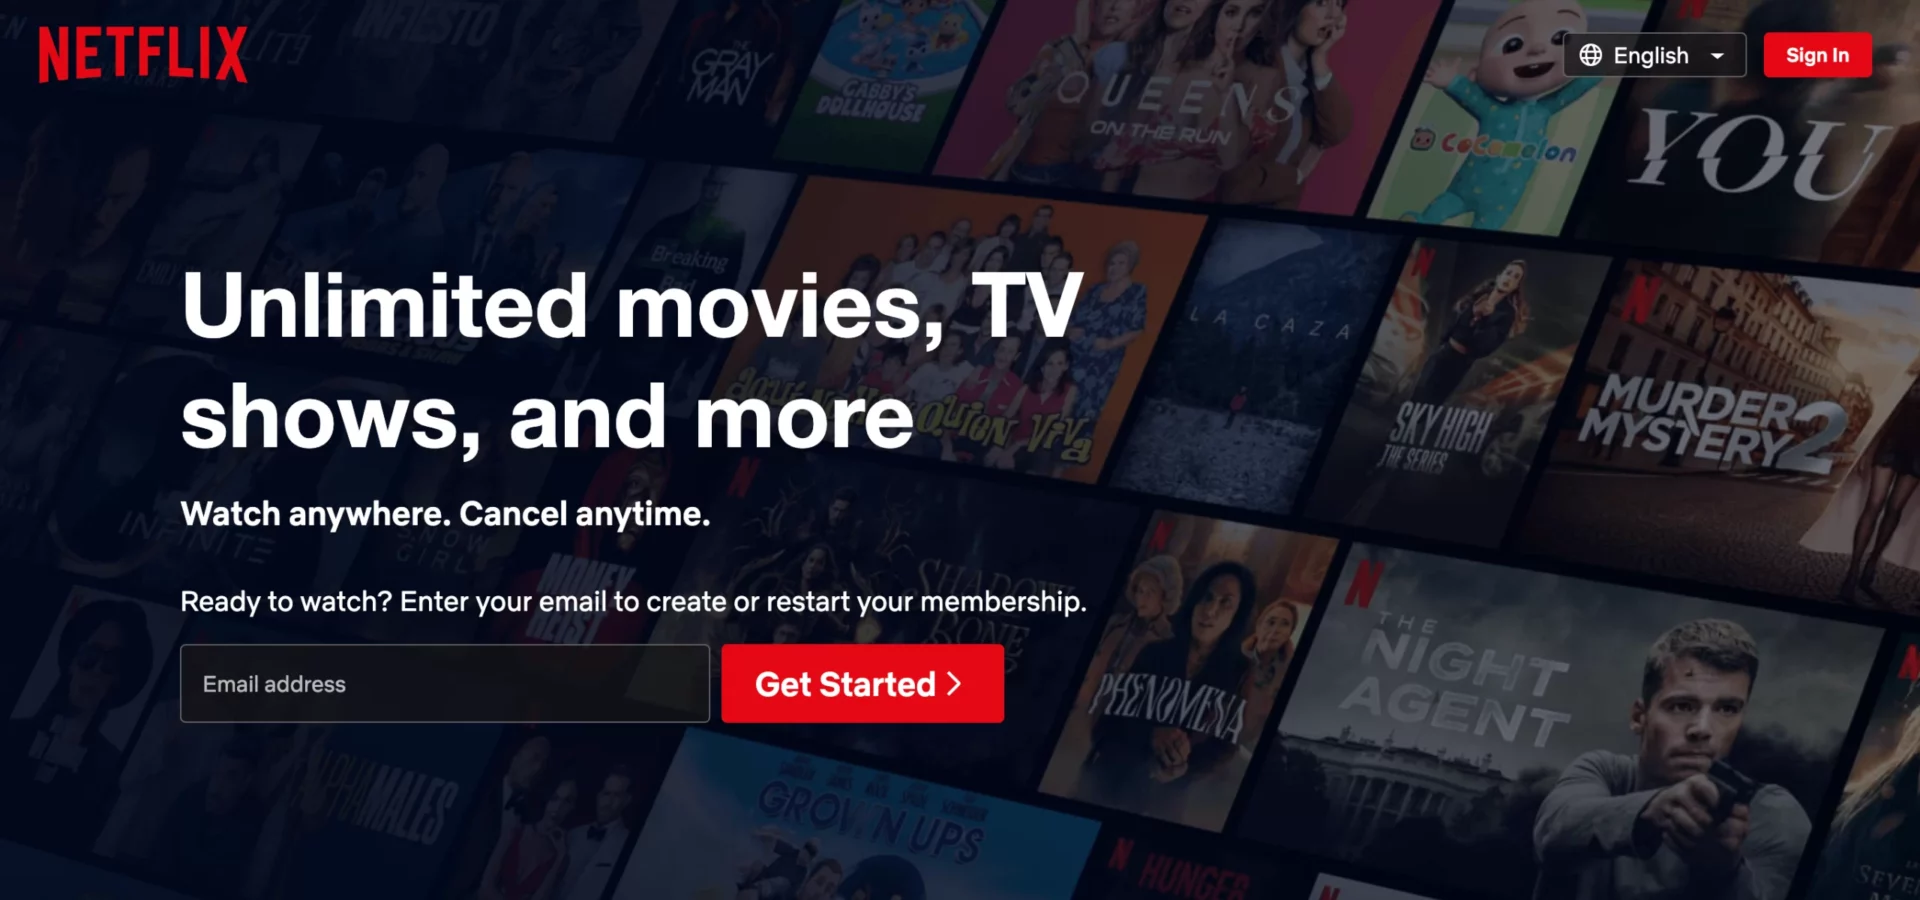 Home page of Netflix